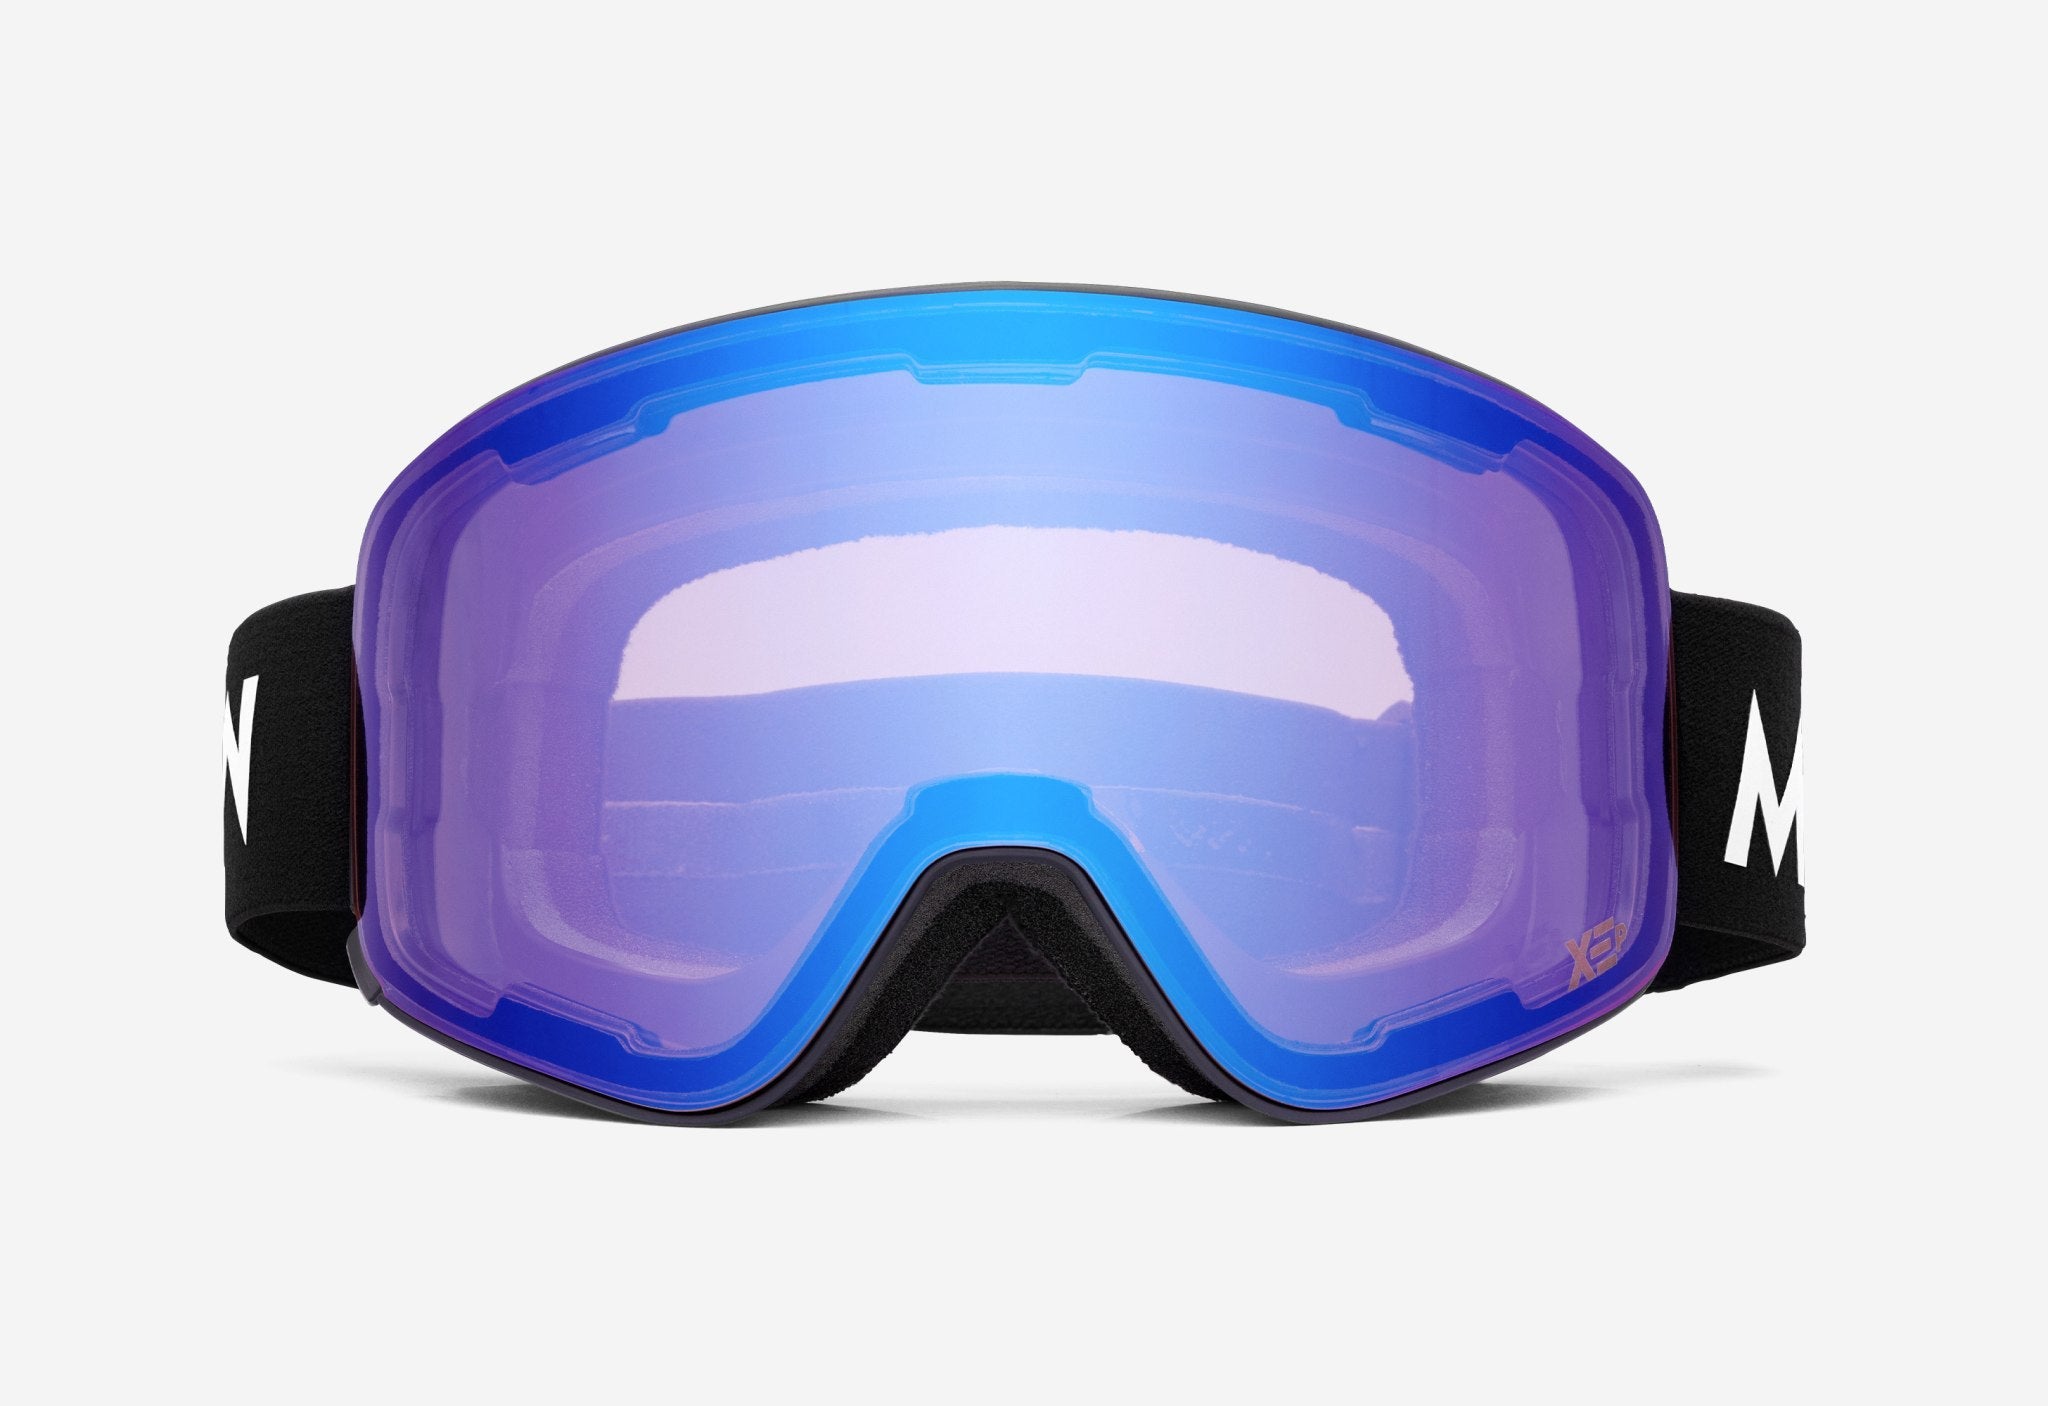 Snow and Ski Goggles quality blue lens black | MessyWeekend